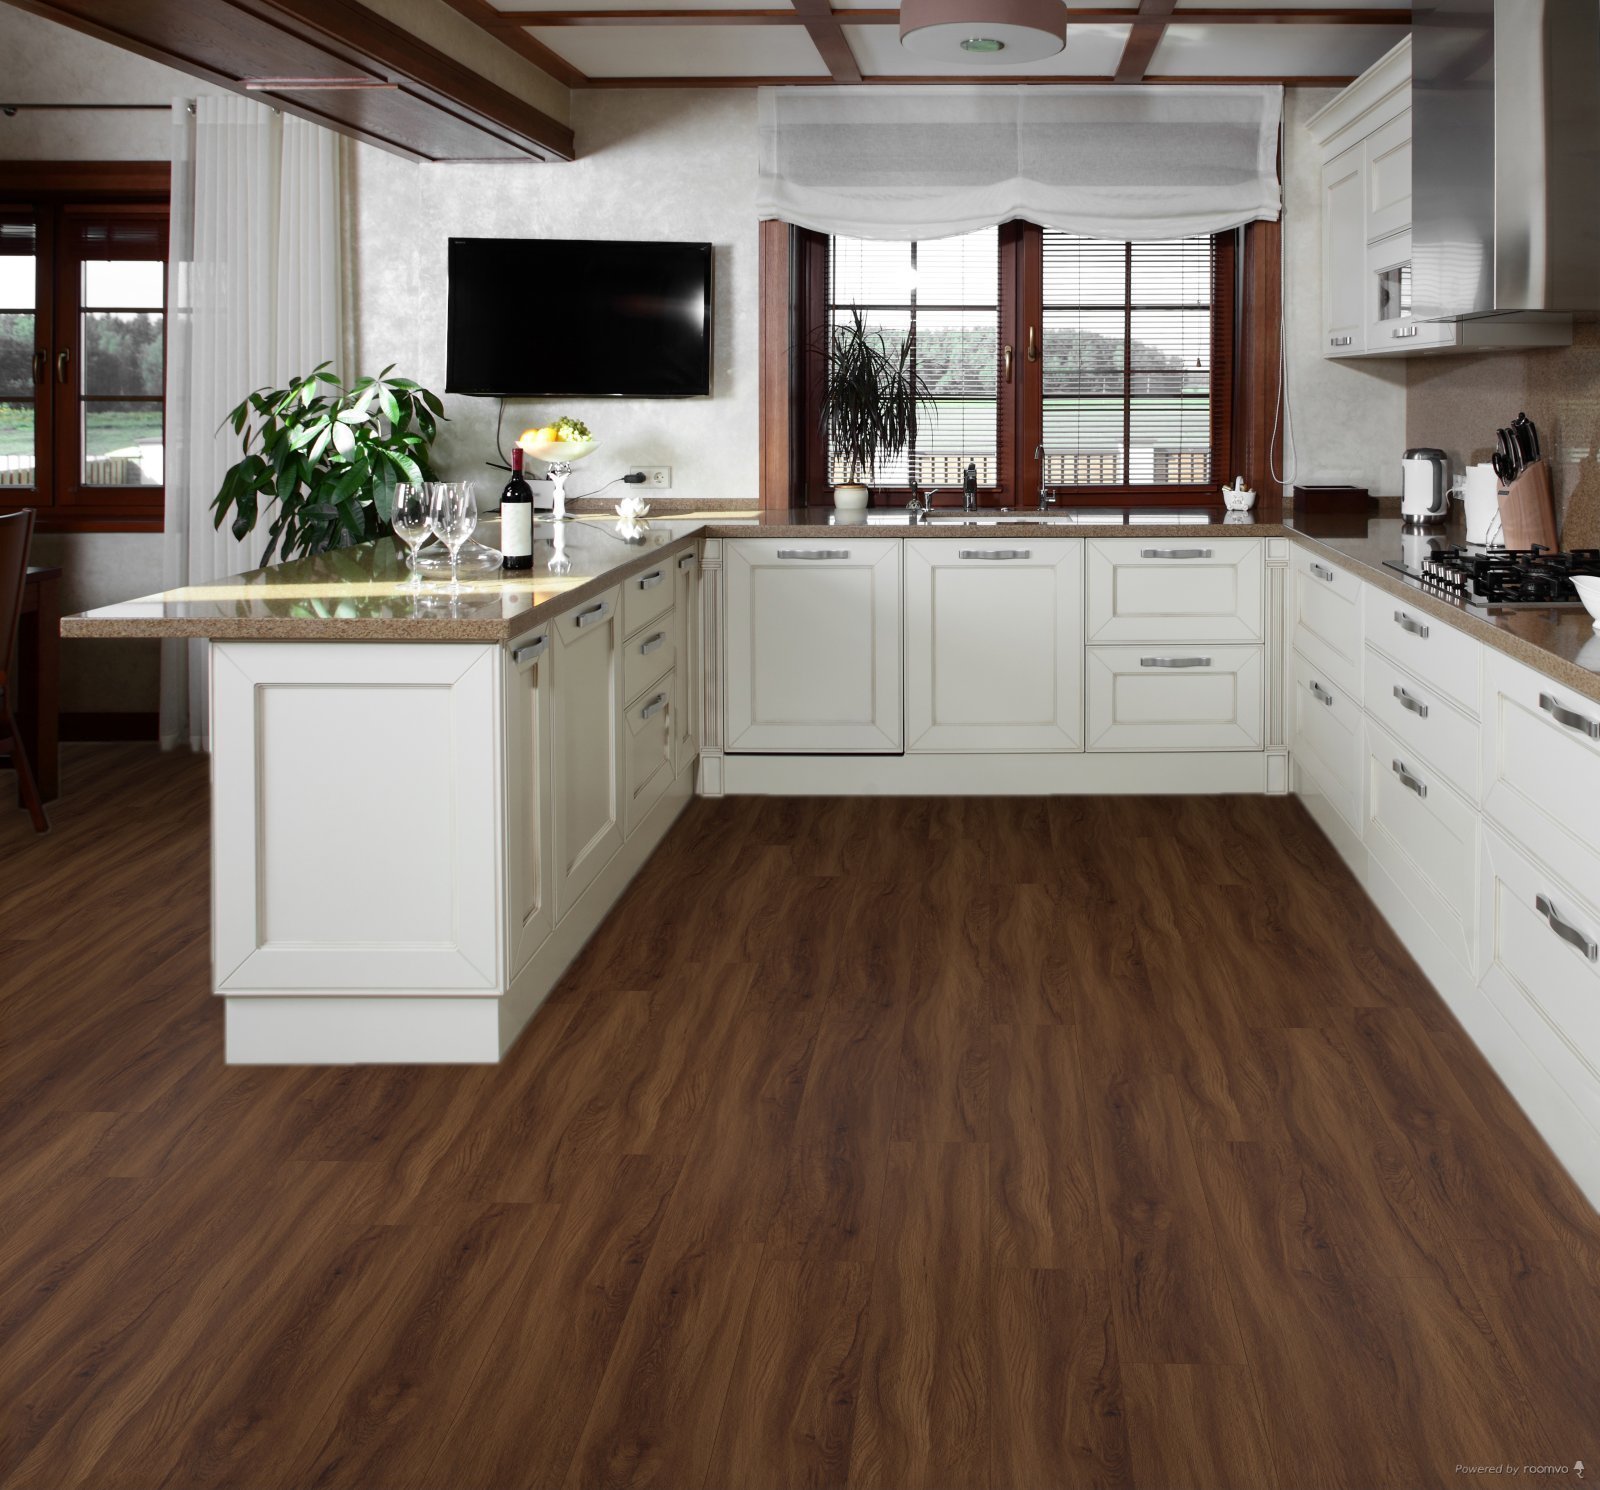 Horizen Flooring presents to you a picture of a quality wide plank Burnt Umber luxury vinyl plank. NovoCore Premium EIR collection features a wide range of colors & designs that will compliment any interior. Natural wood grain synchronized surface allow for an authentic hardwood look & feel. This collection features a 0.25″ / 6.5 mm overall thickness and a durable 22 mil / 0.55 mm wear layer for residential and commercial applications.